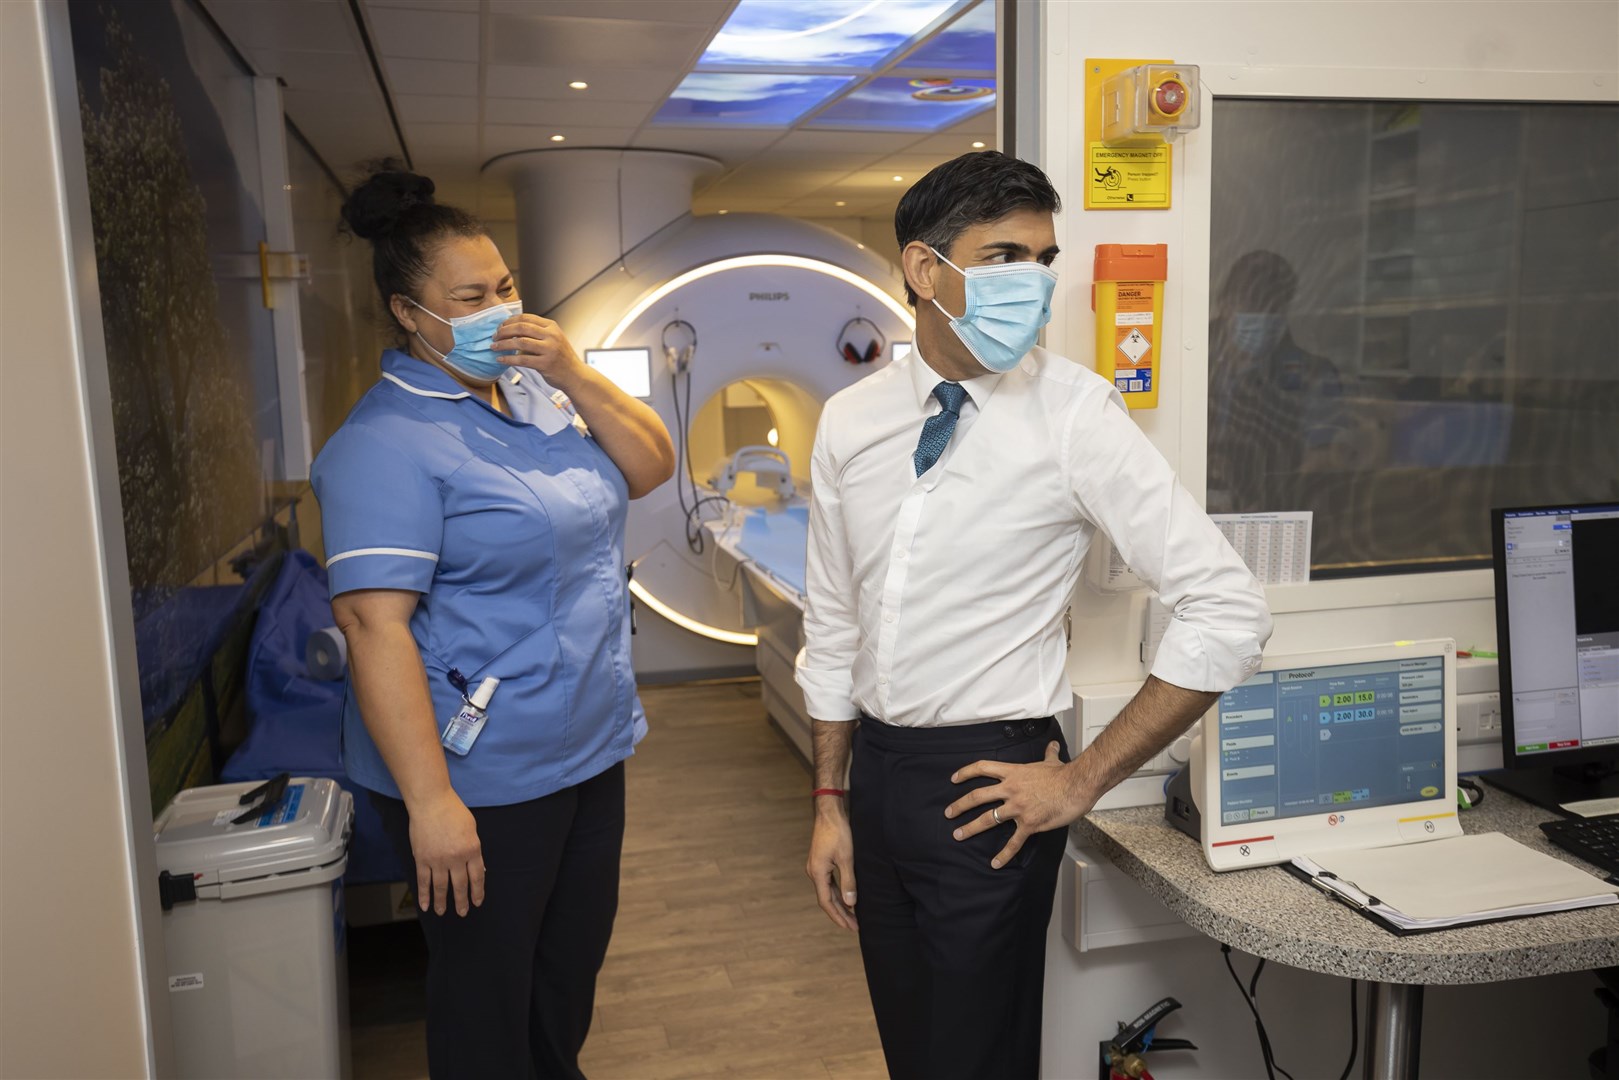 Prime Minister Rishi Sunak during a visit to Oldham Community Diagnostic Centre in Oldham, Greater Manchester (James Glossop/The Times/PA)